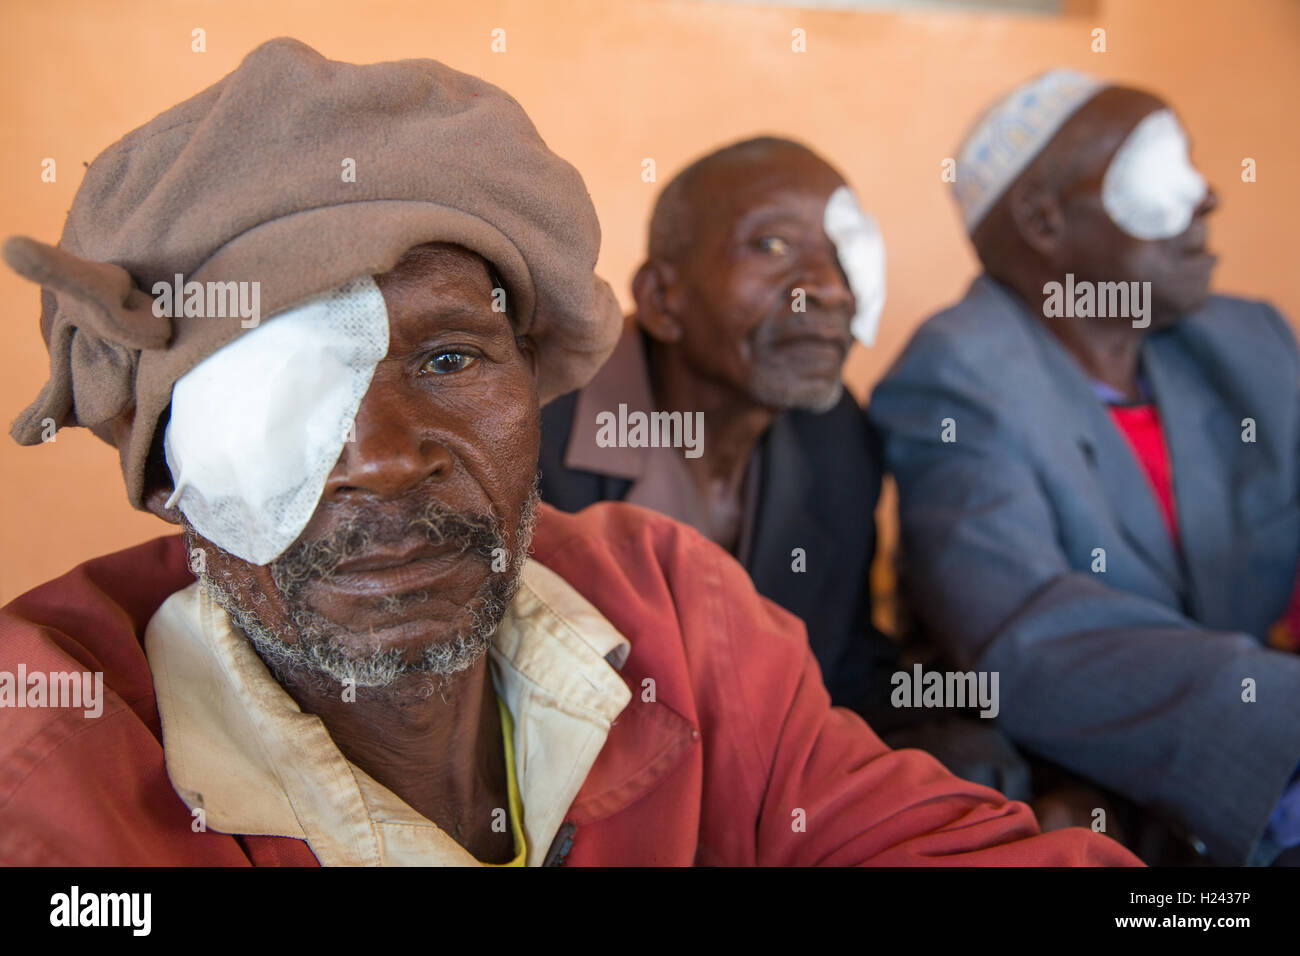 Ribaue Hospital, Ribaue,  Nampula Province, Mozambique, August 2015: Chico Alapueia from Malema, about to have their bandage removed after cataract operation the day before.  Photo by Mike Goldwater Stock Photo